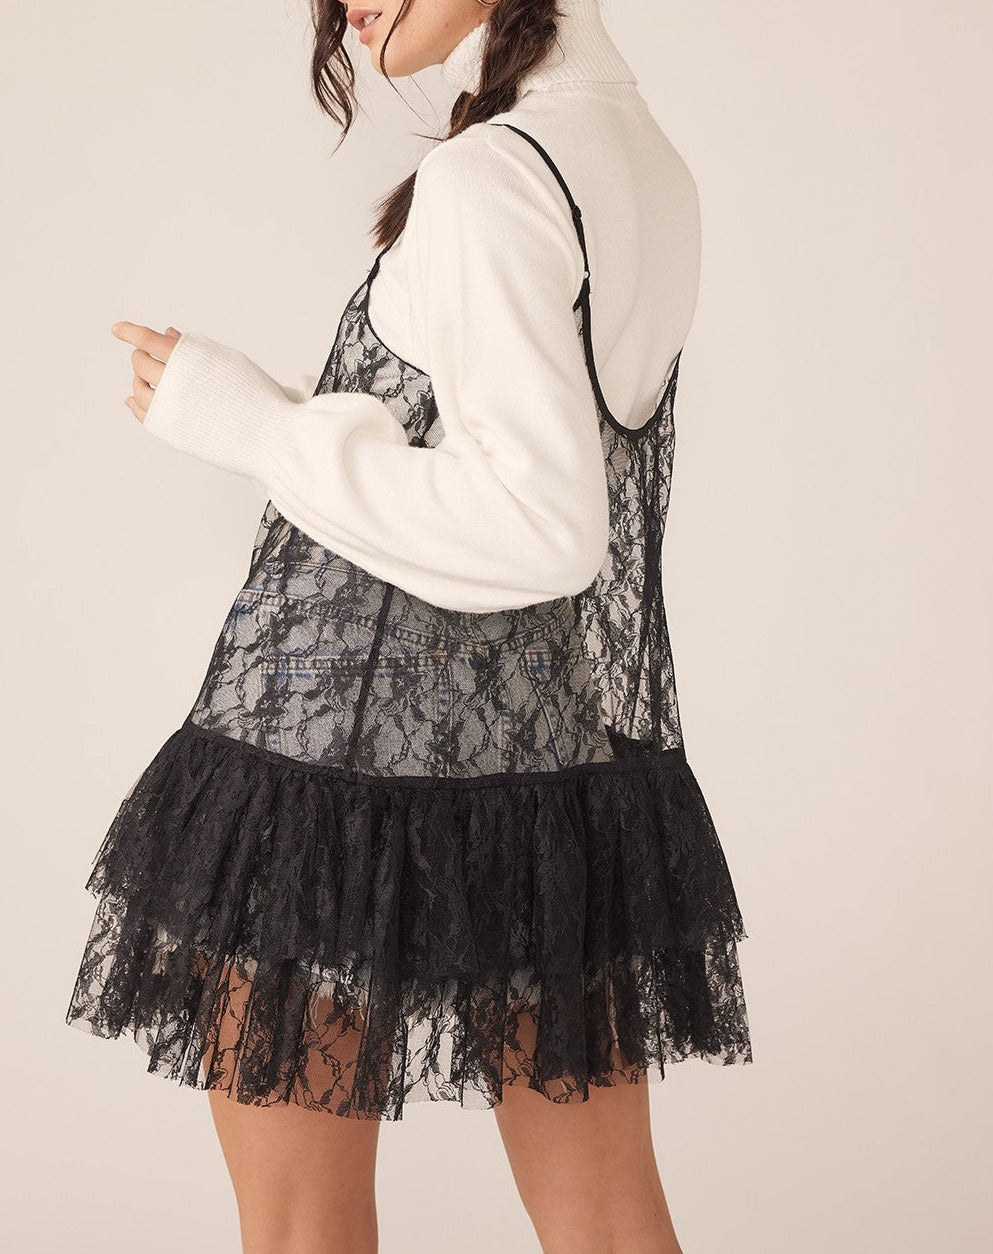 LACE RUFFLE COVER